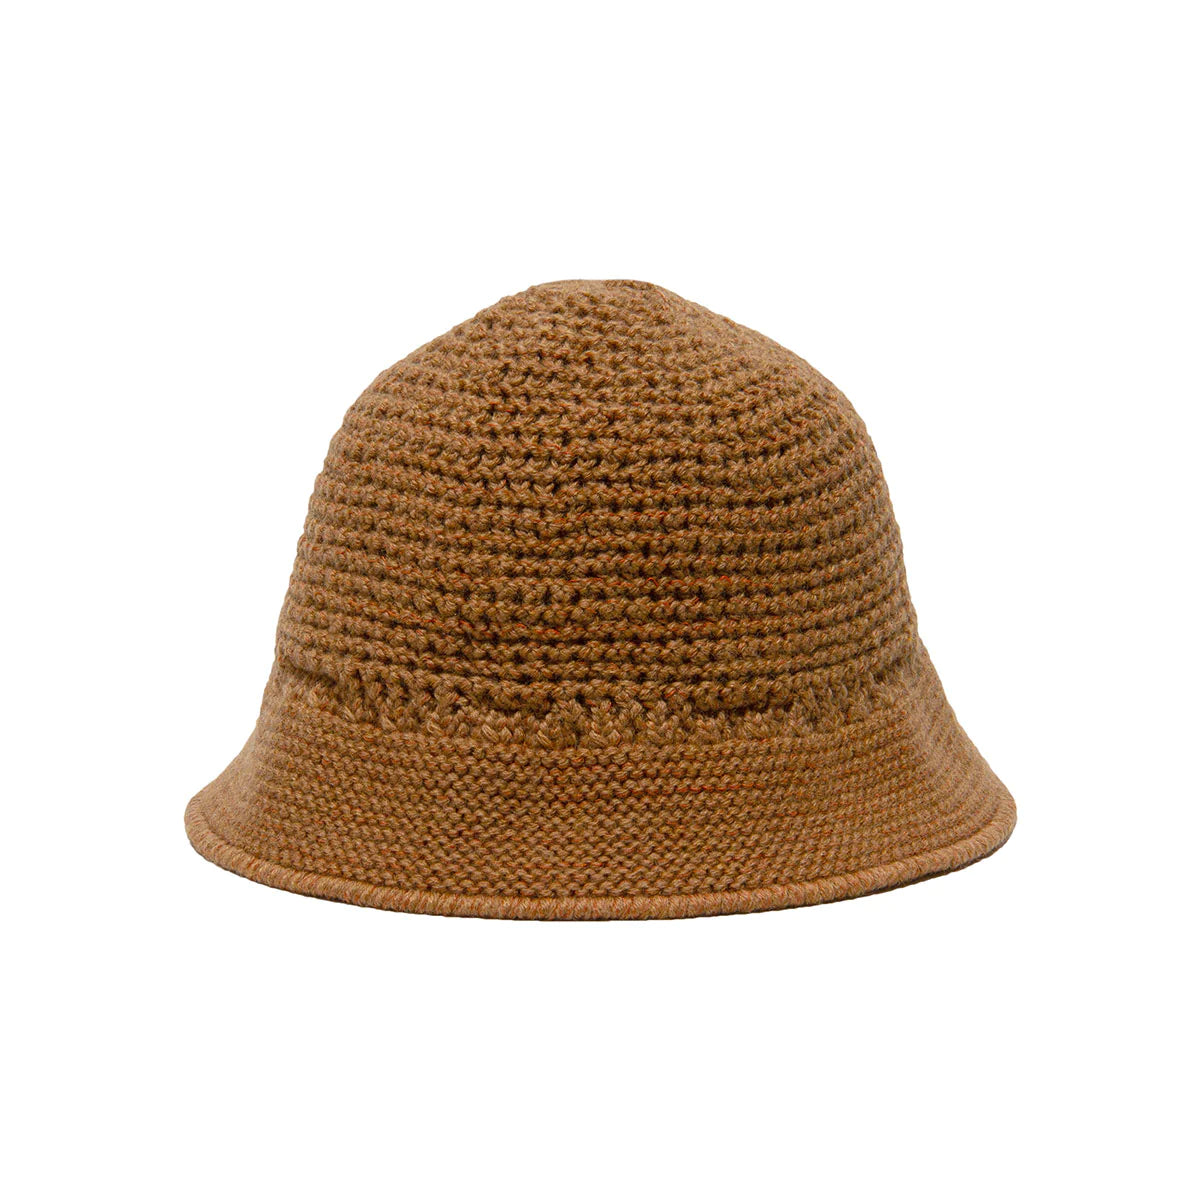 The H.W. Dog & Co - WOOL KNIT HAT - Gold